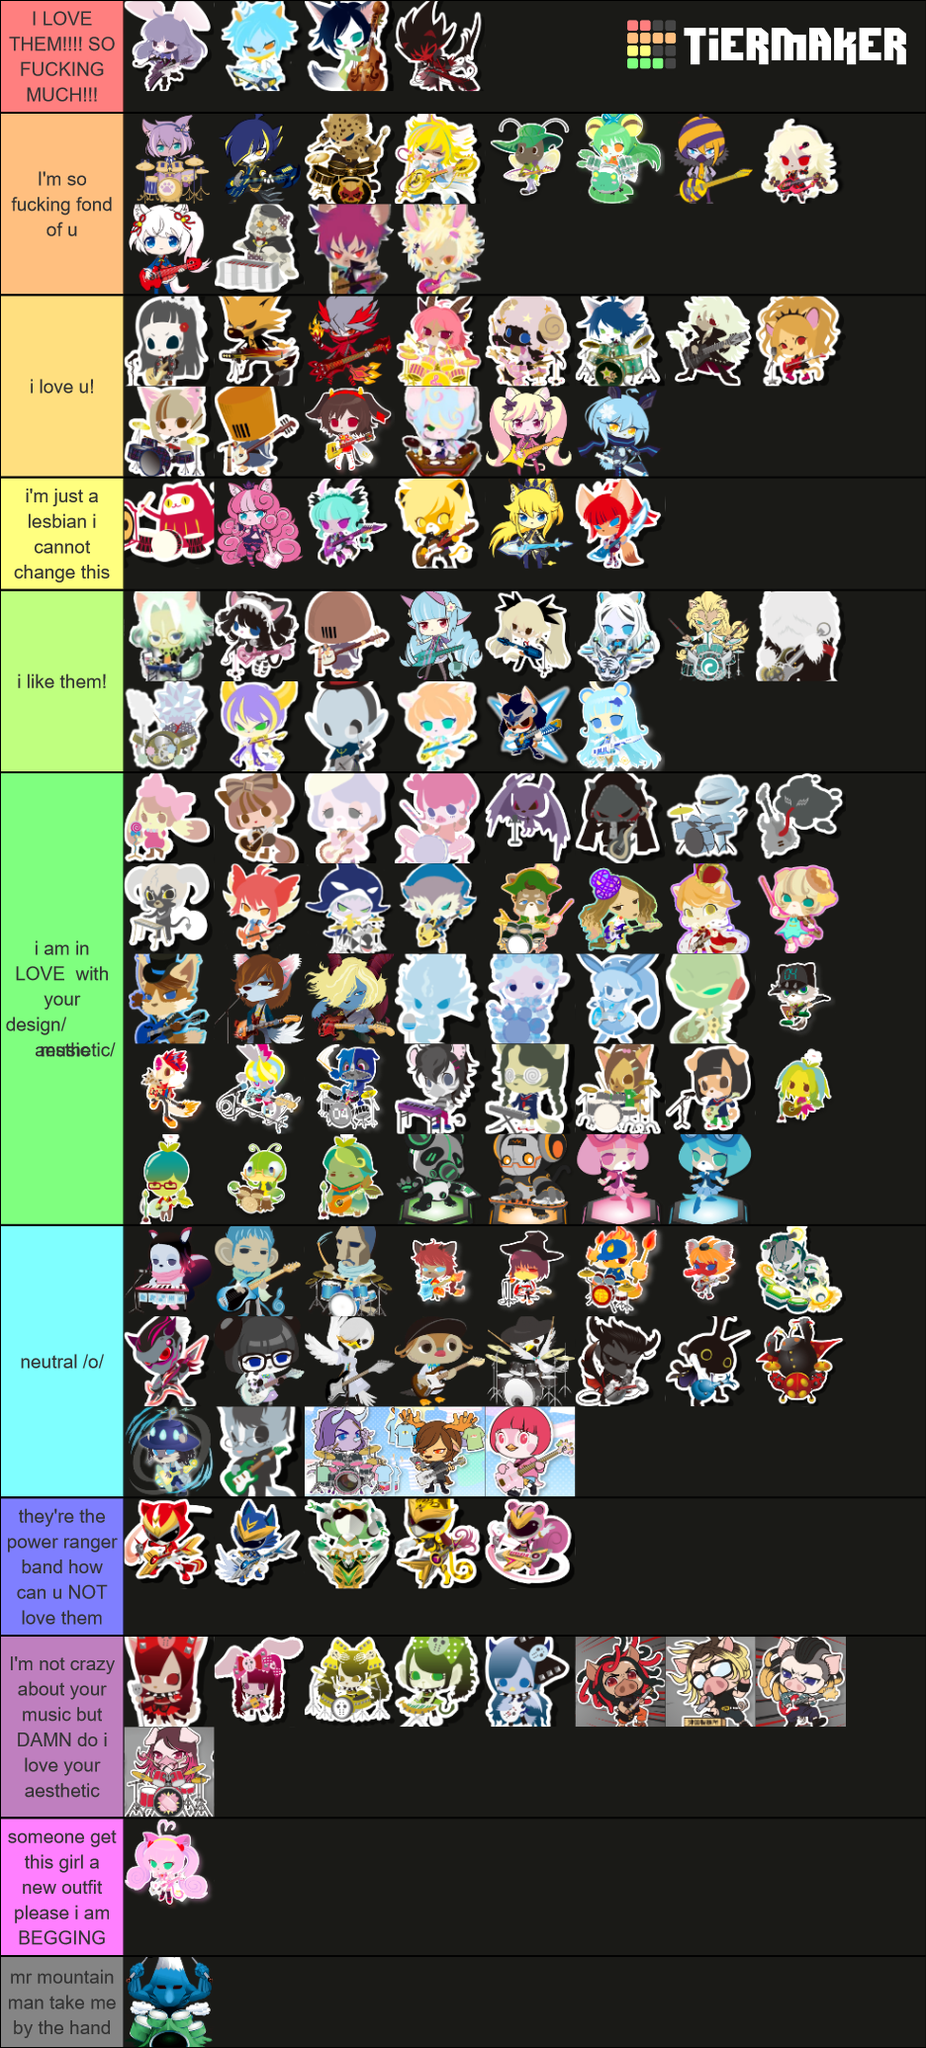 Create a Show By Rock fes a live characters1 Tier List - TierMaker